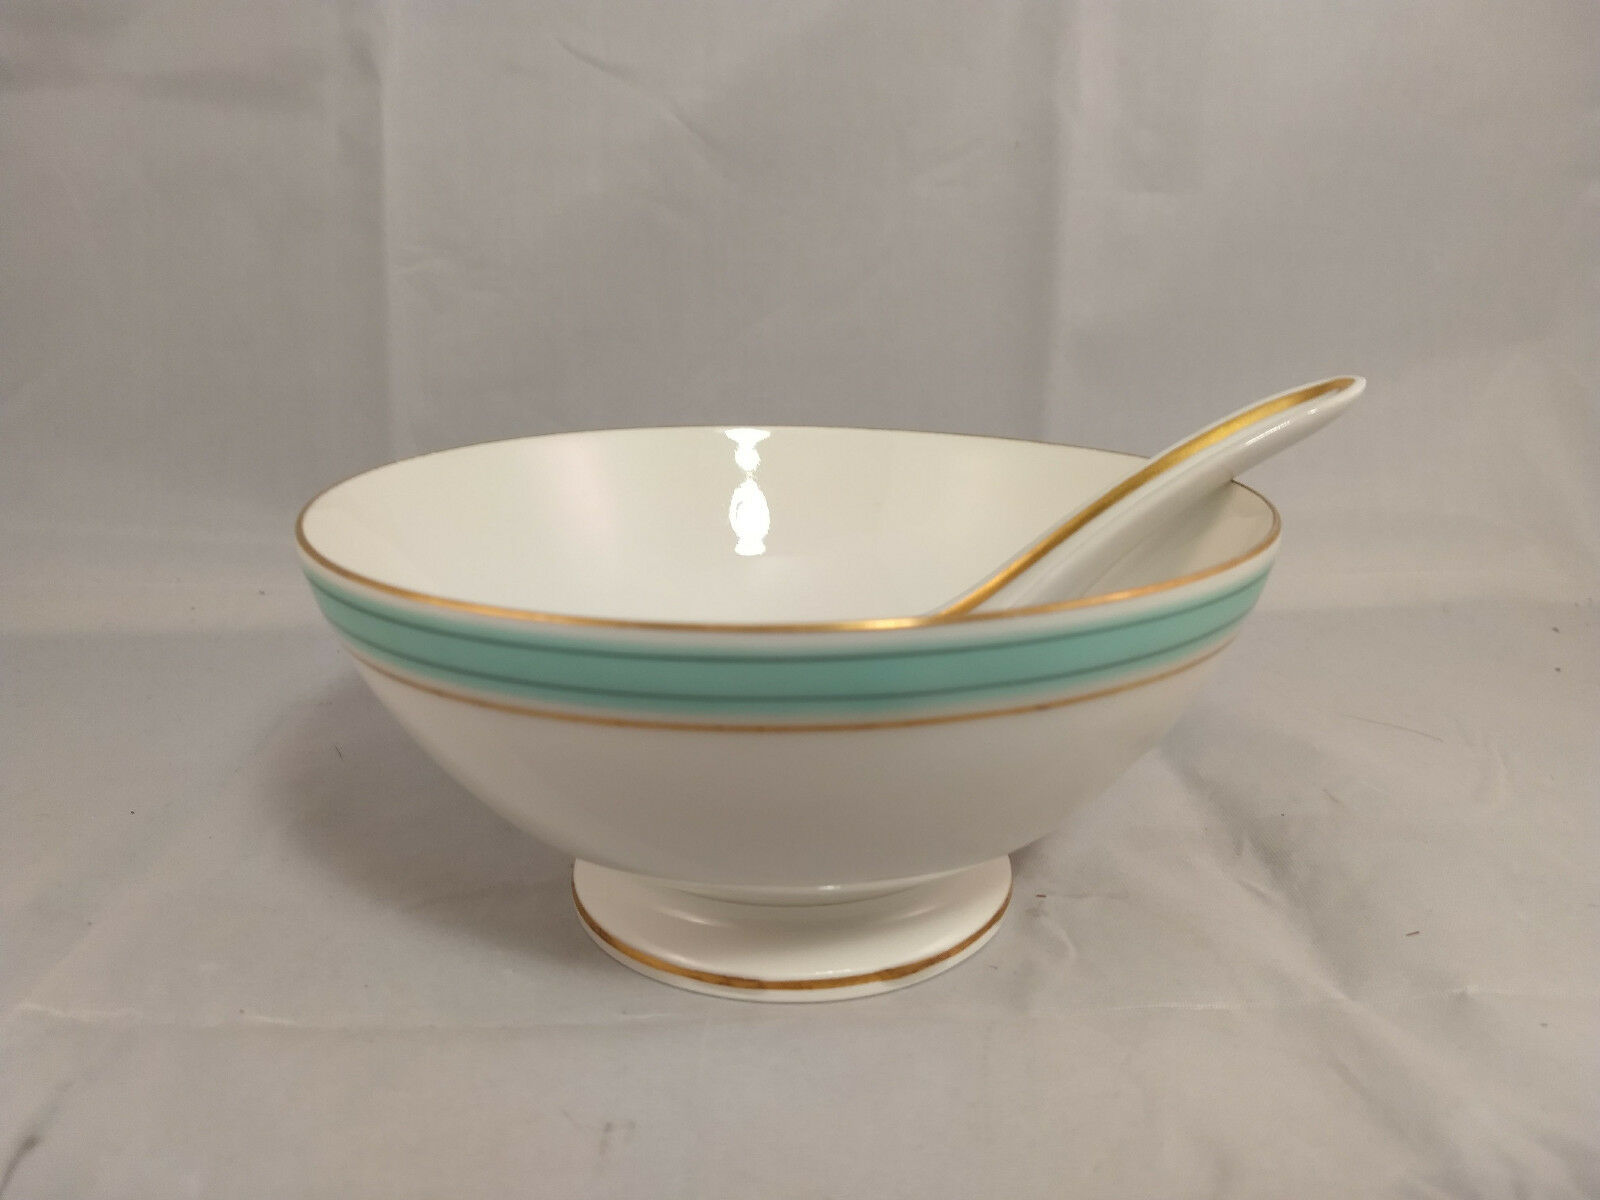 Heinrich H&co Aqua/turquoise And Gold 6" Footed Bowl - Cranberry/candy/nuts